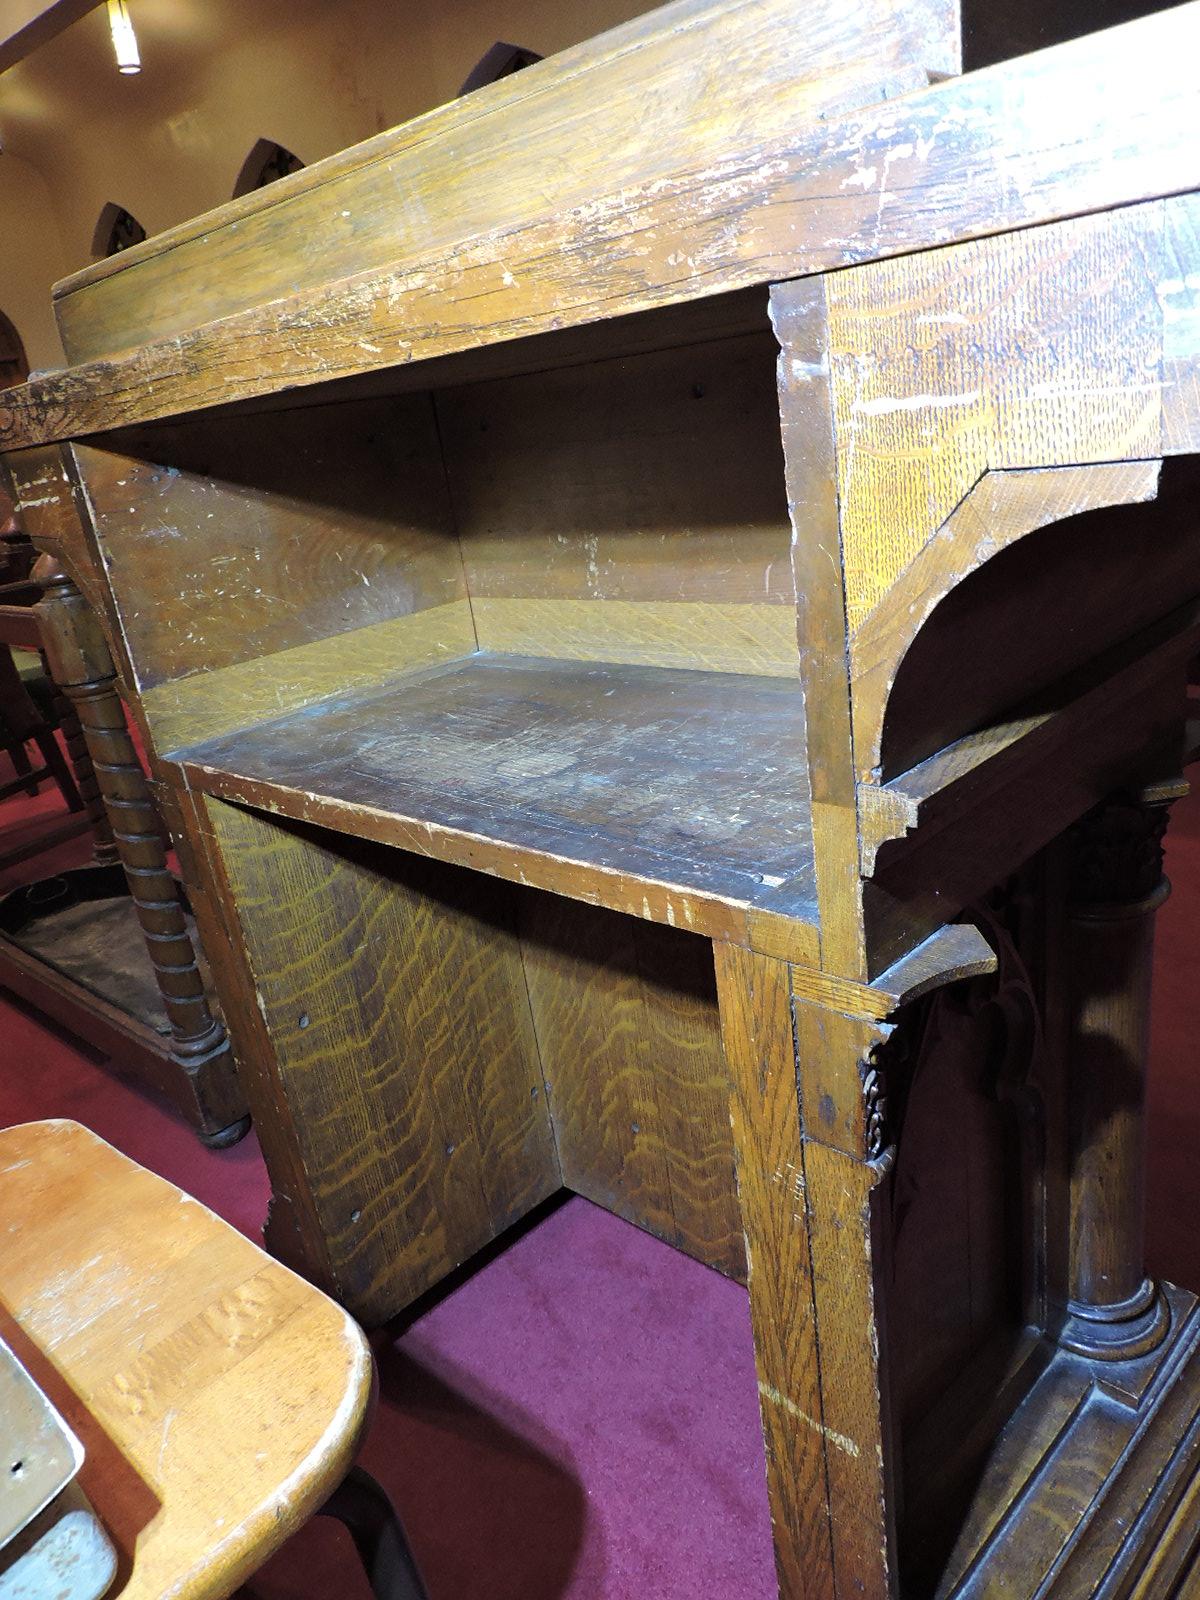 100+ Year Old Formal Lectern - Solid Wood Construction